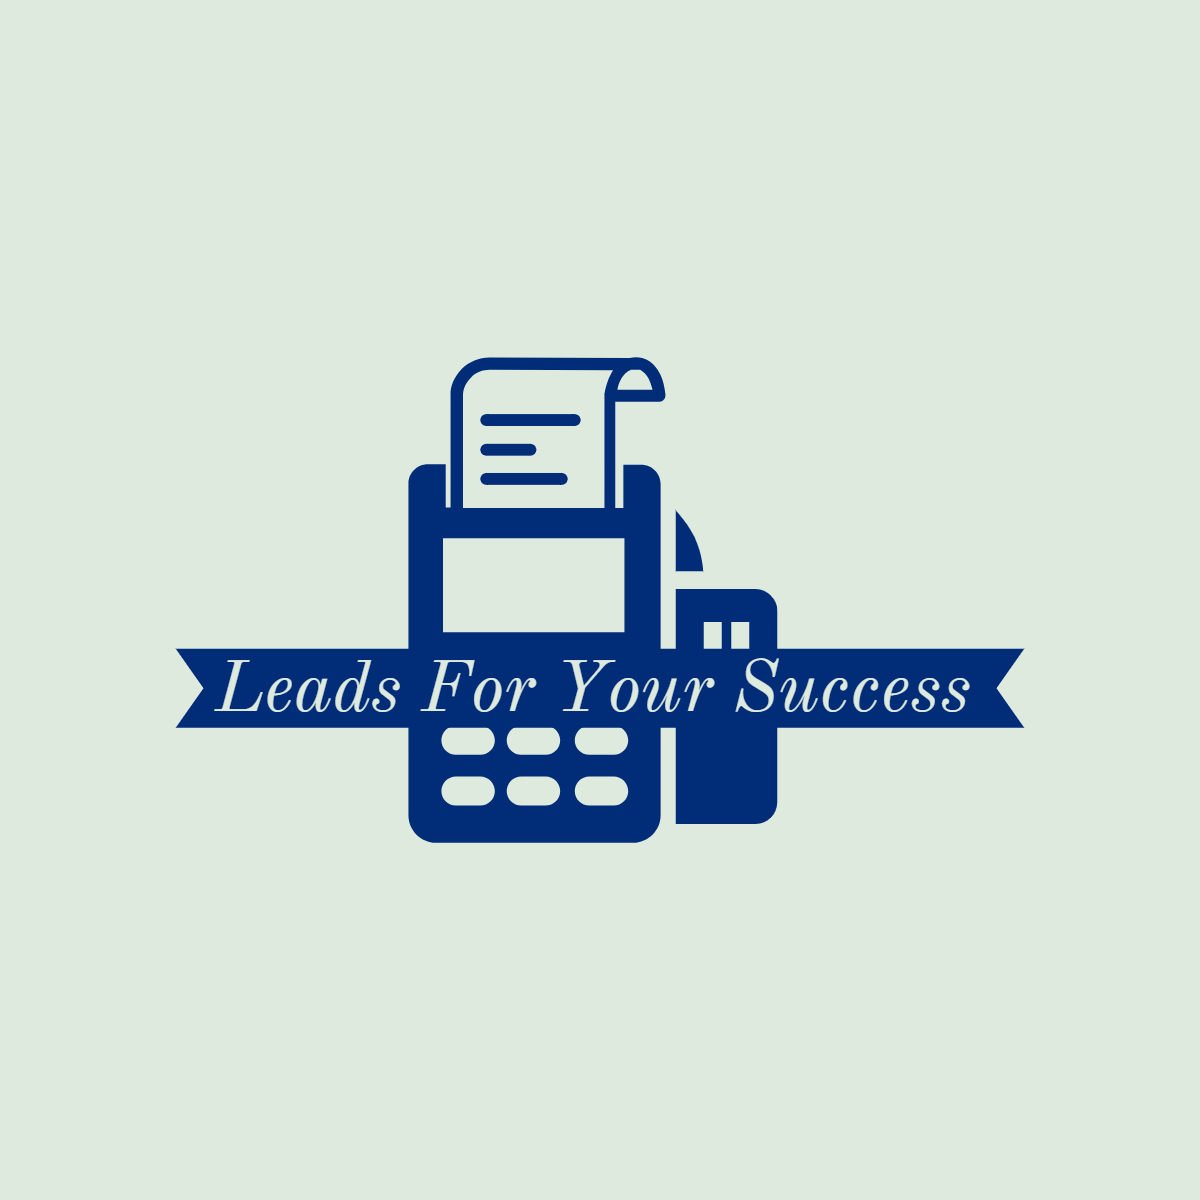 Leads For Your Success